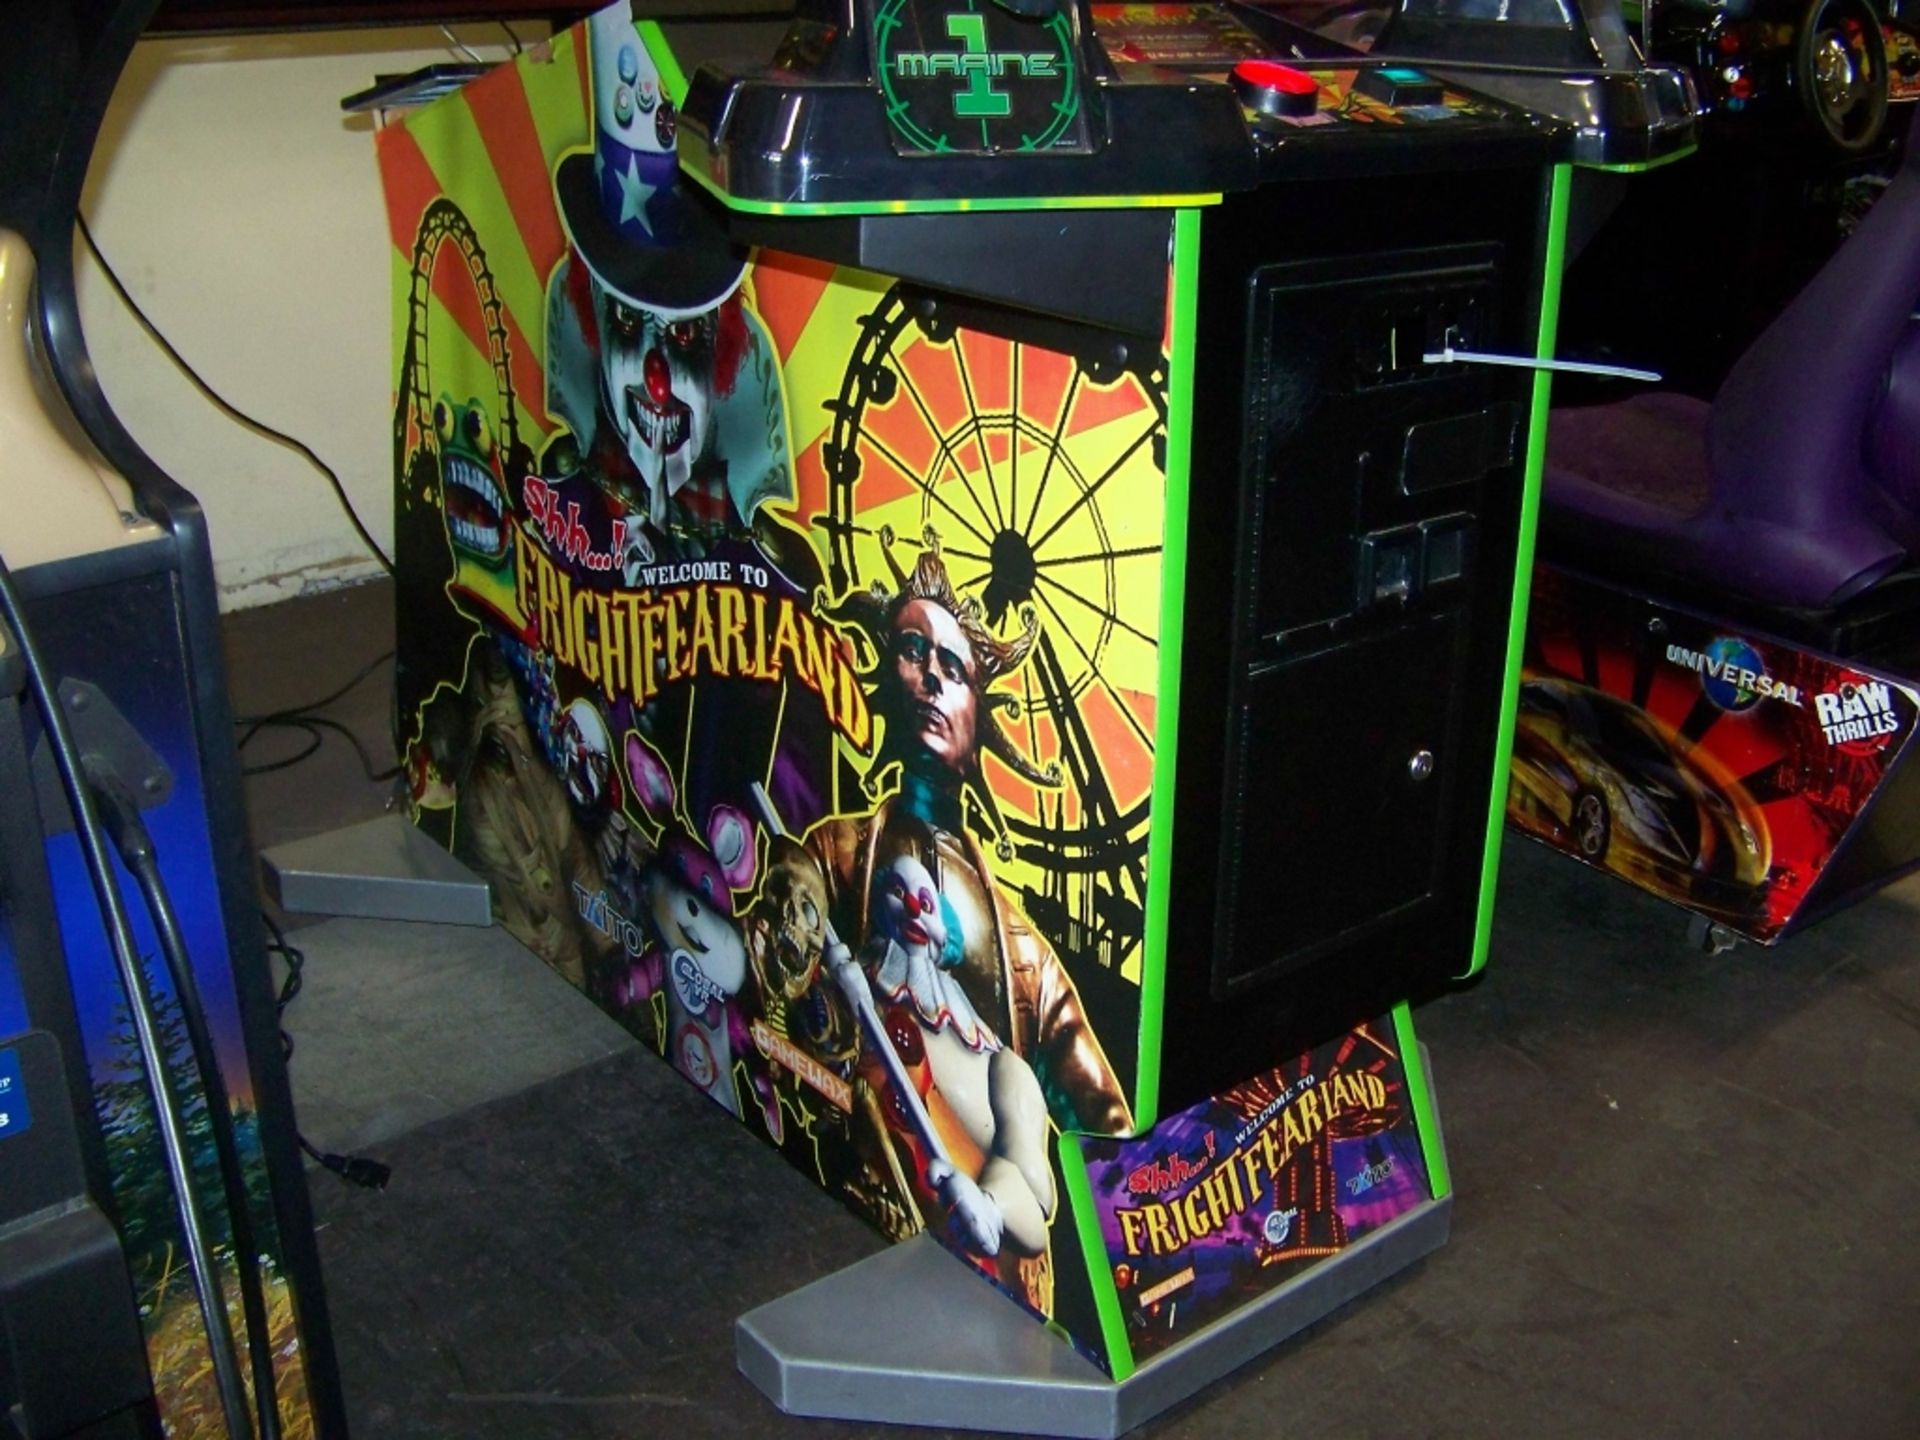 FRIGHT FEARLAND FIXED GUN SHOOTER ARCADE GAME - Image 6 of 6